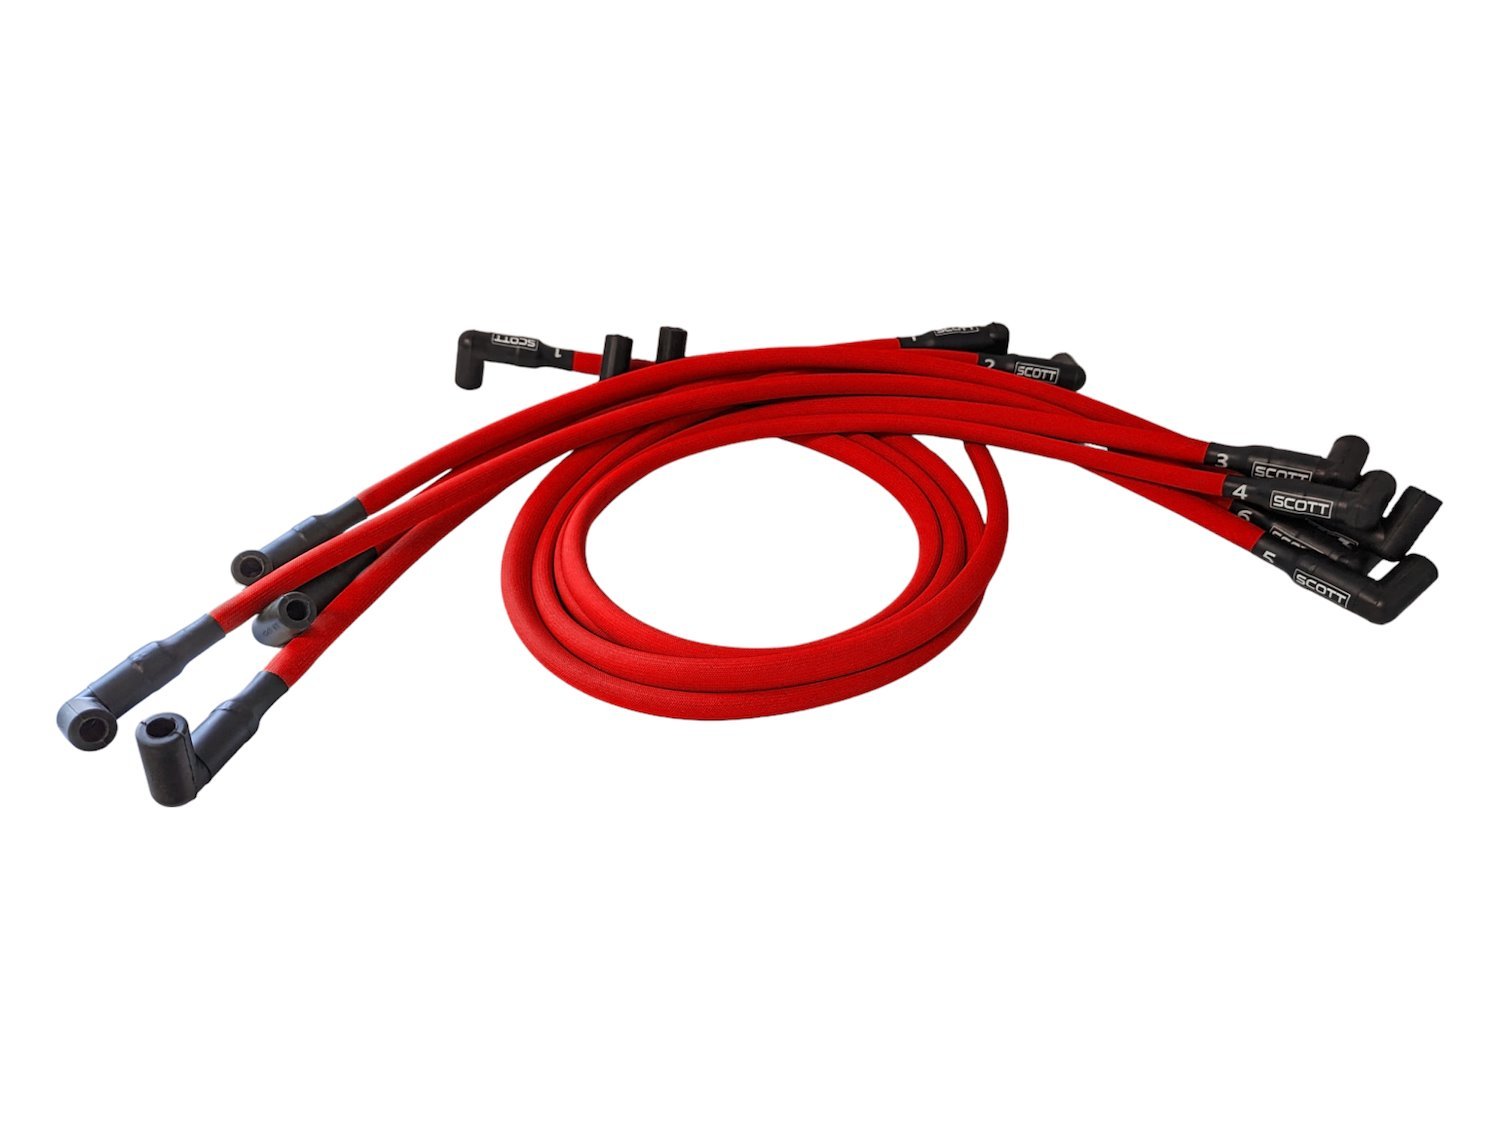 SPW-PS-402-2 High-Performance Fiberglass-Oversleeved Spark Plug Wire Set for Small Block Chevy, Over Valve Cover [Red]